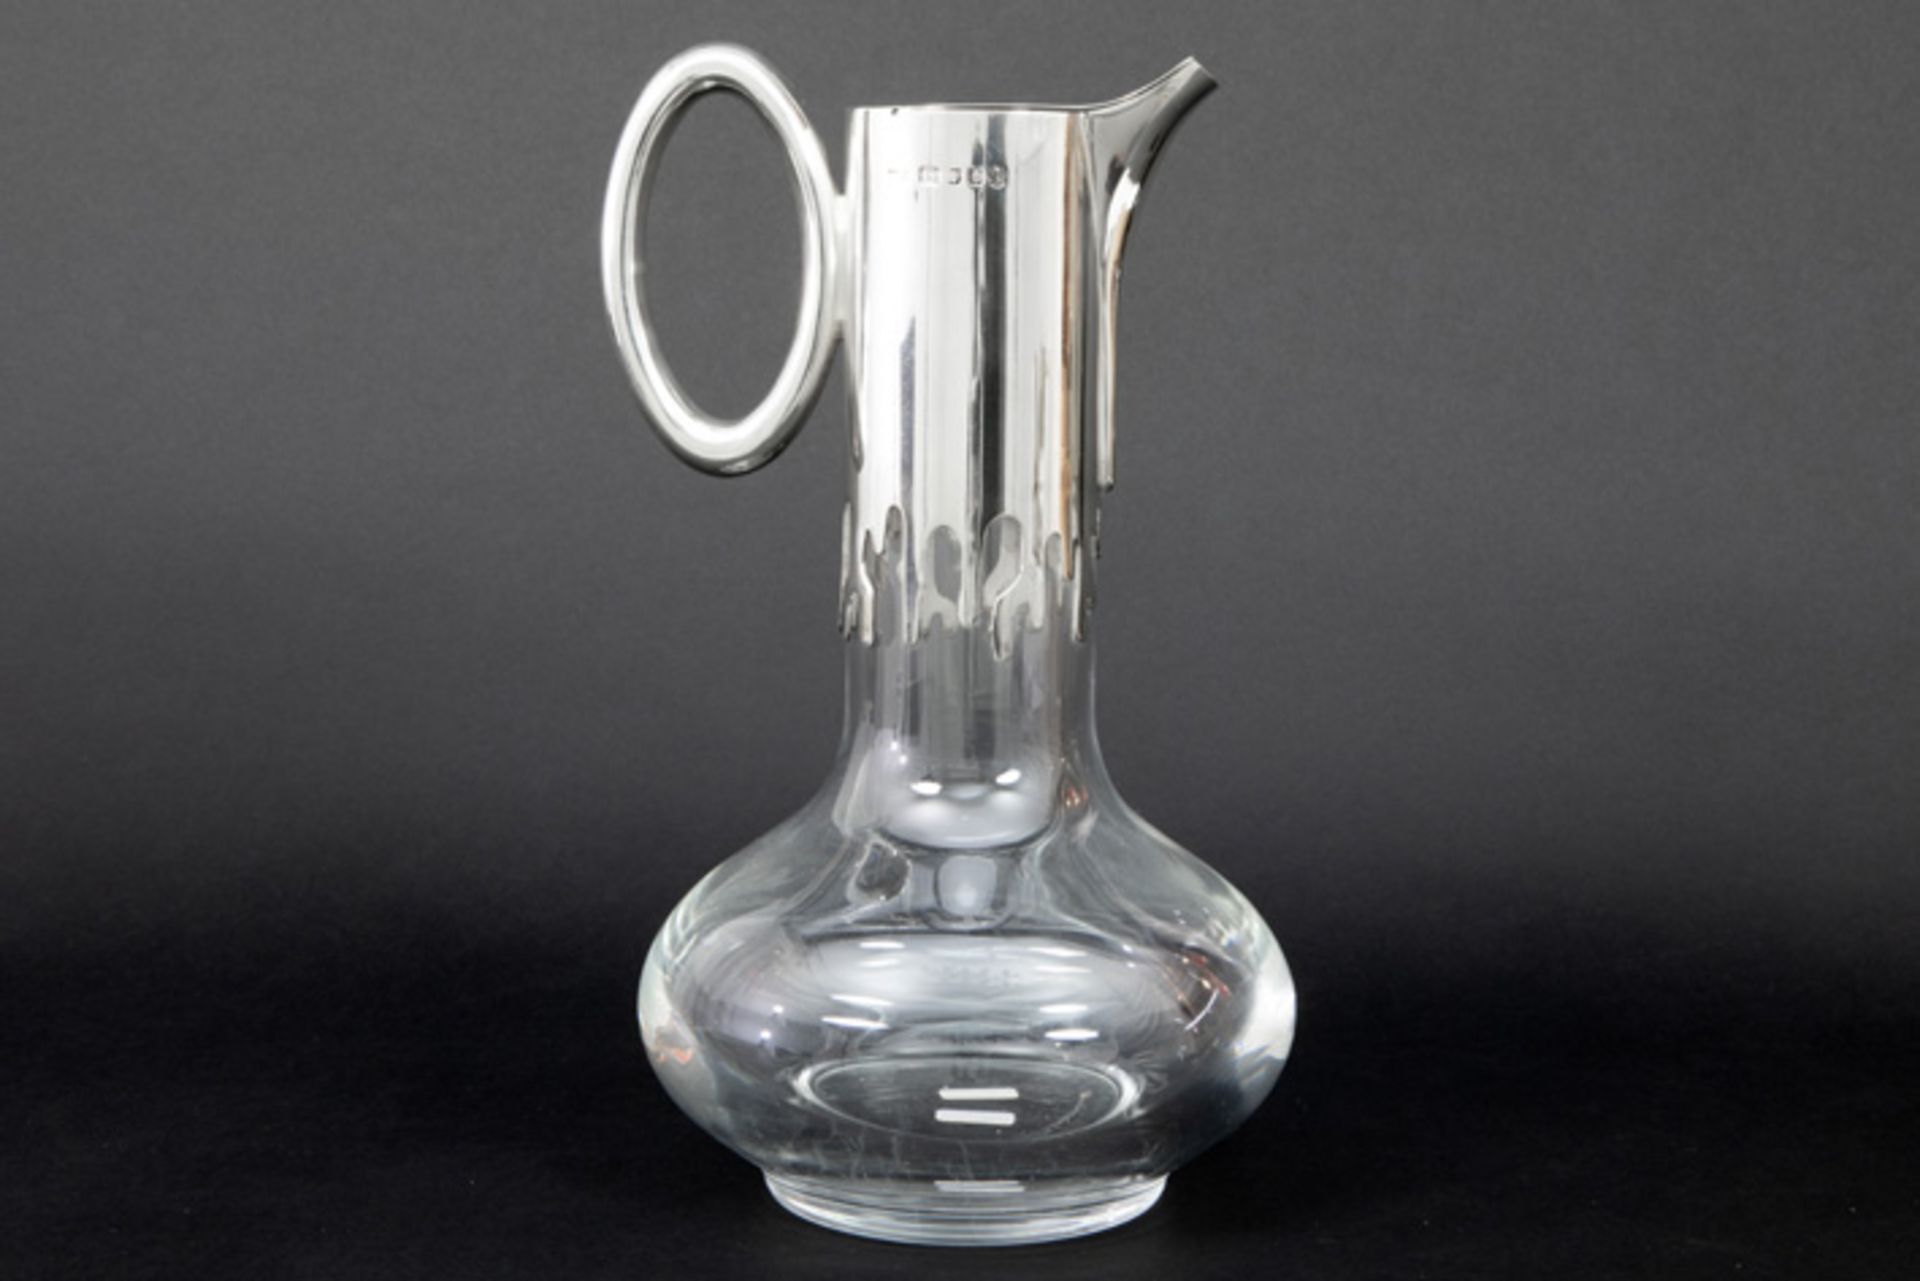 seventies' "Mappin & Webb" marked design decanter/pitcher in clear glass and silver dated 1977||